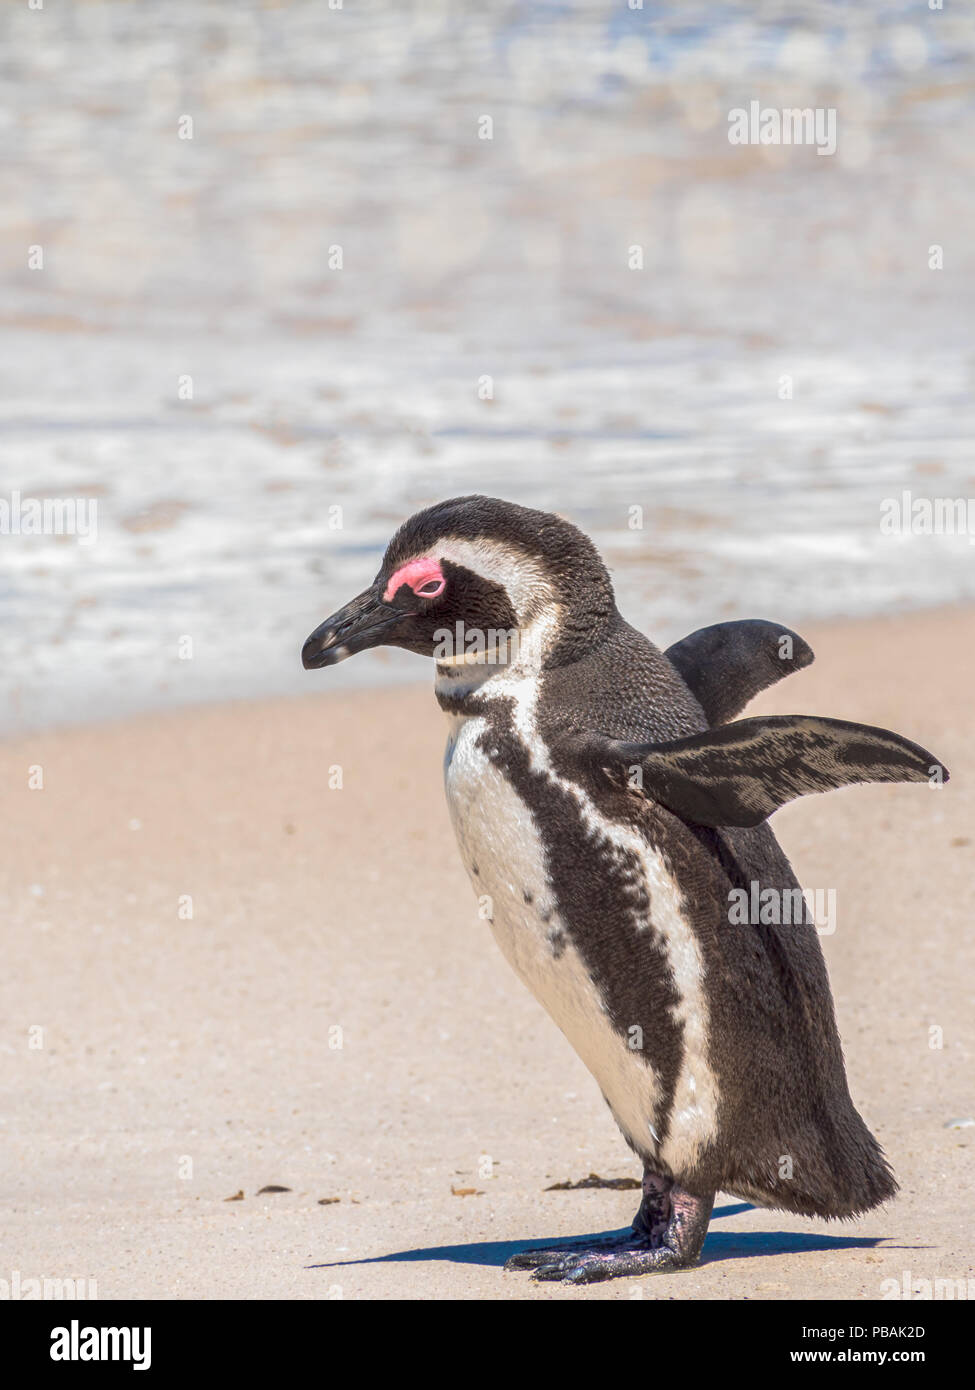 African Penguin on beach in South Africa Stock Photo